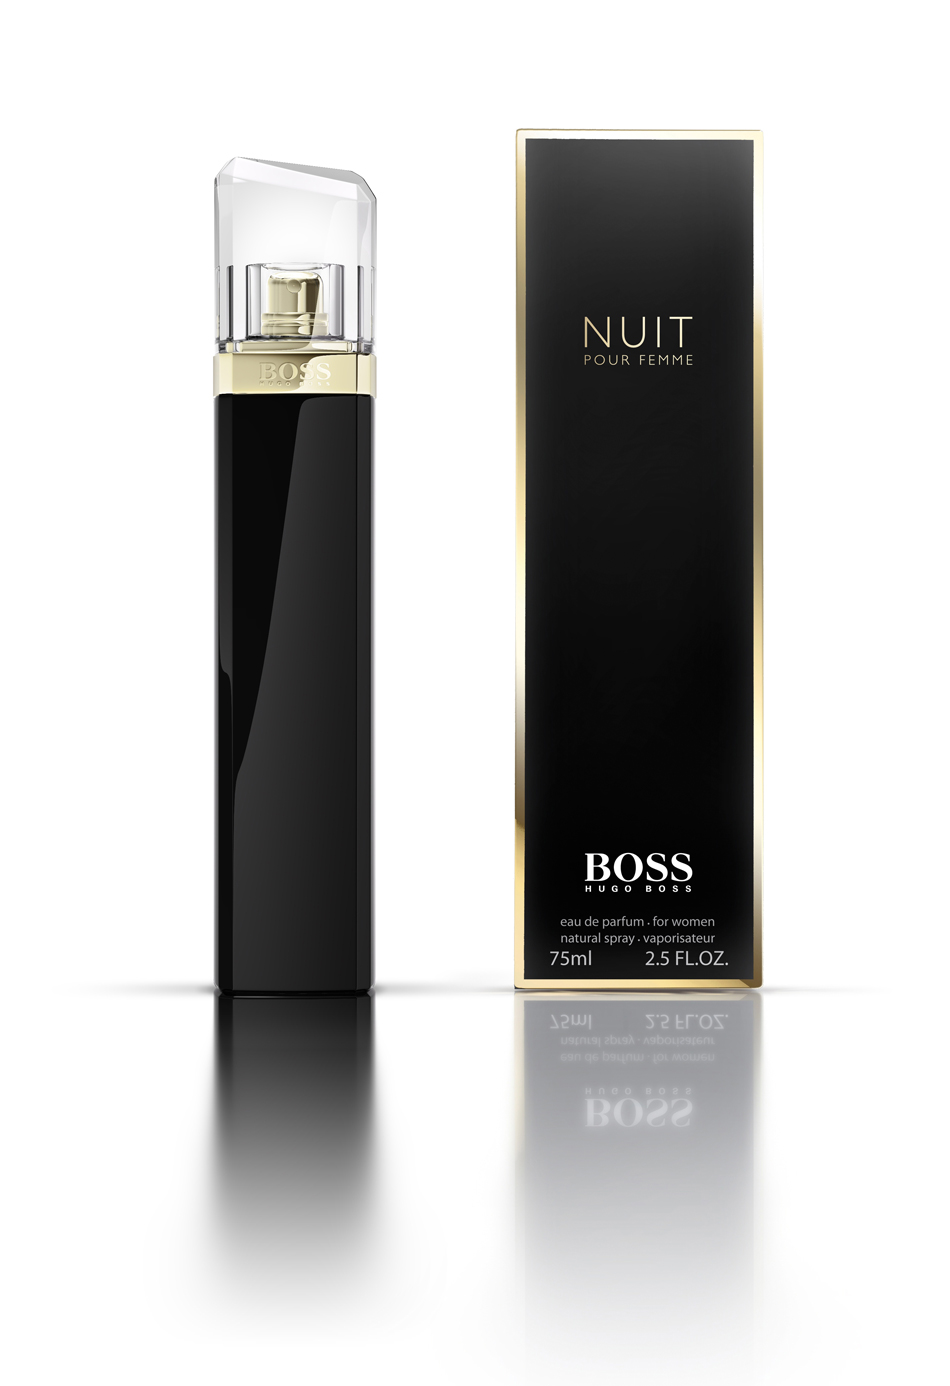 BOSS Nuit Pour Femme is available nationwide.